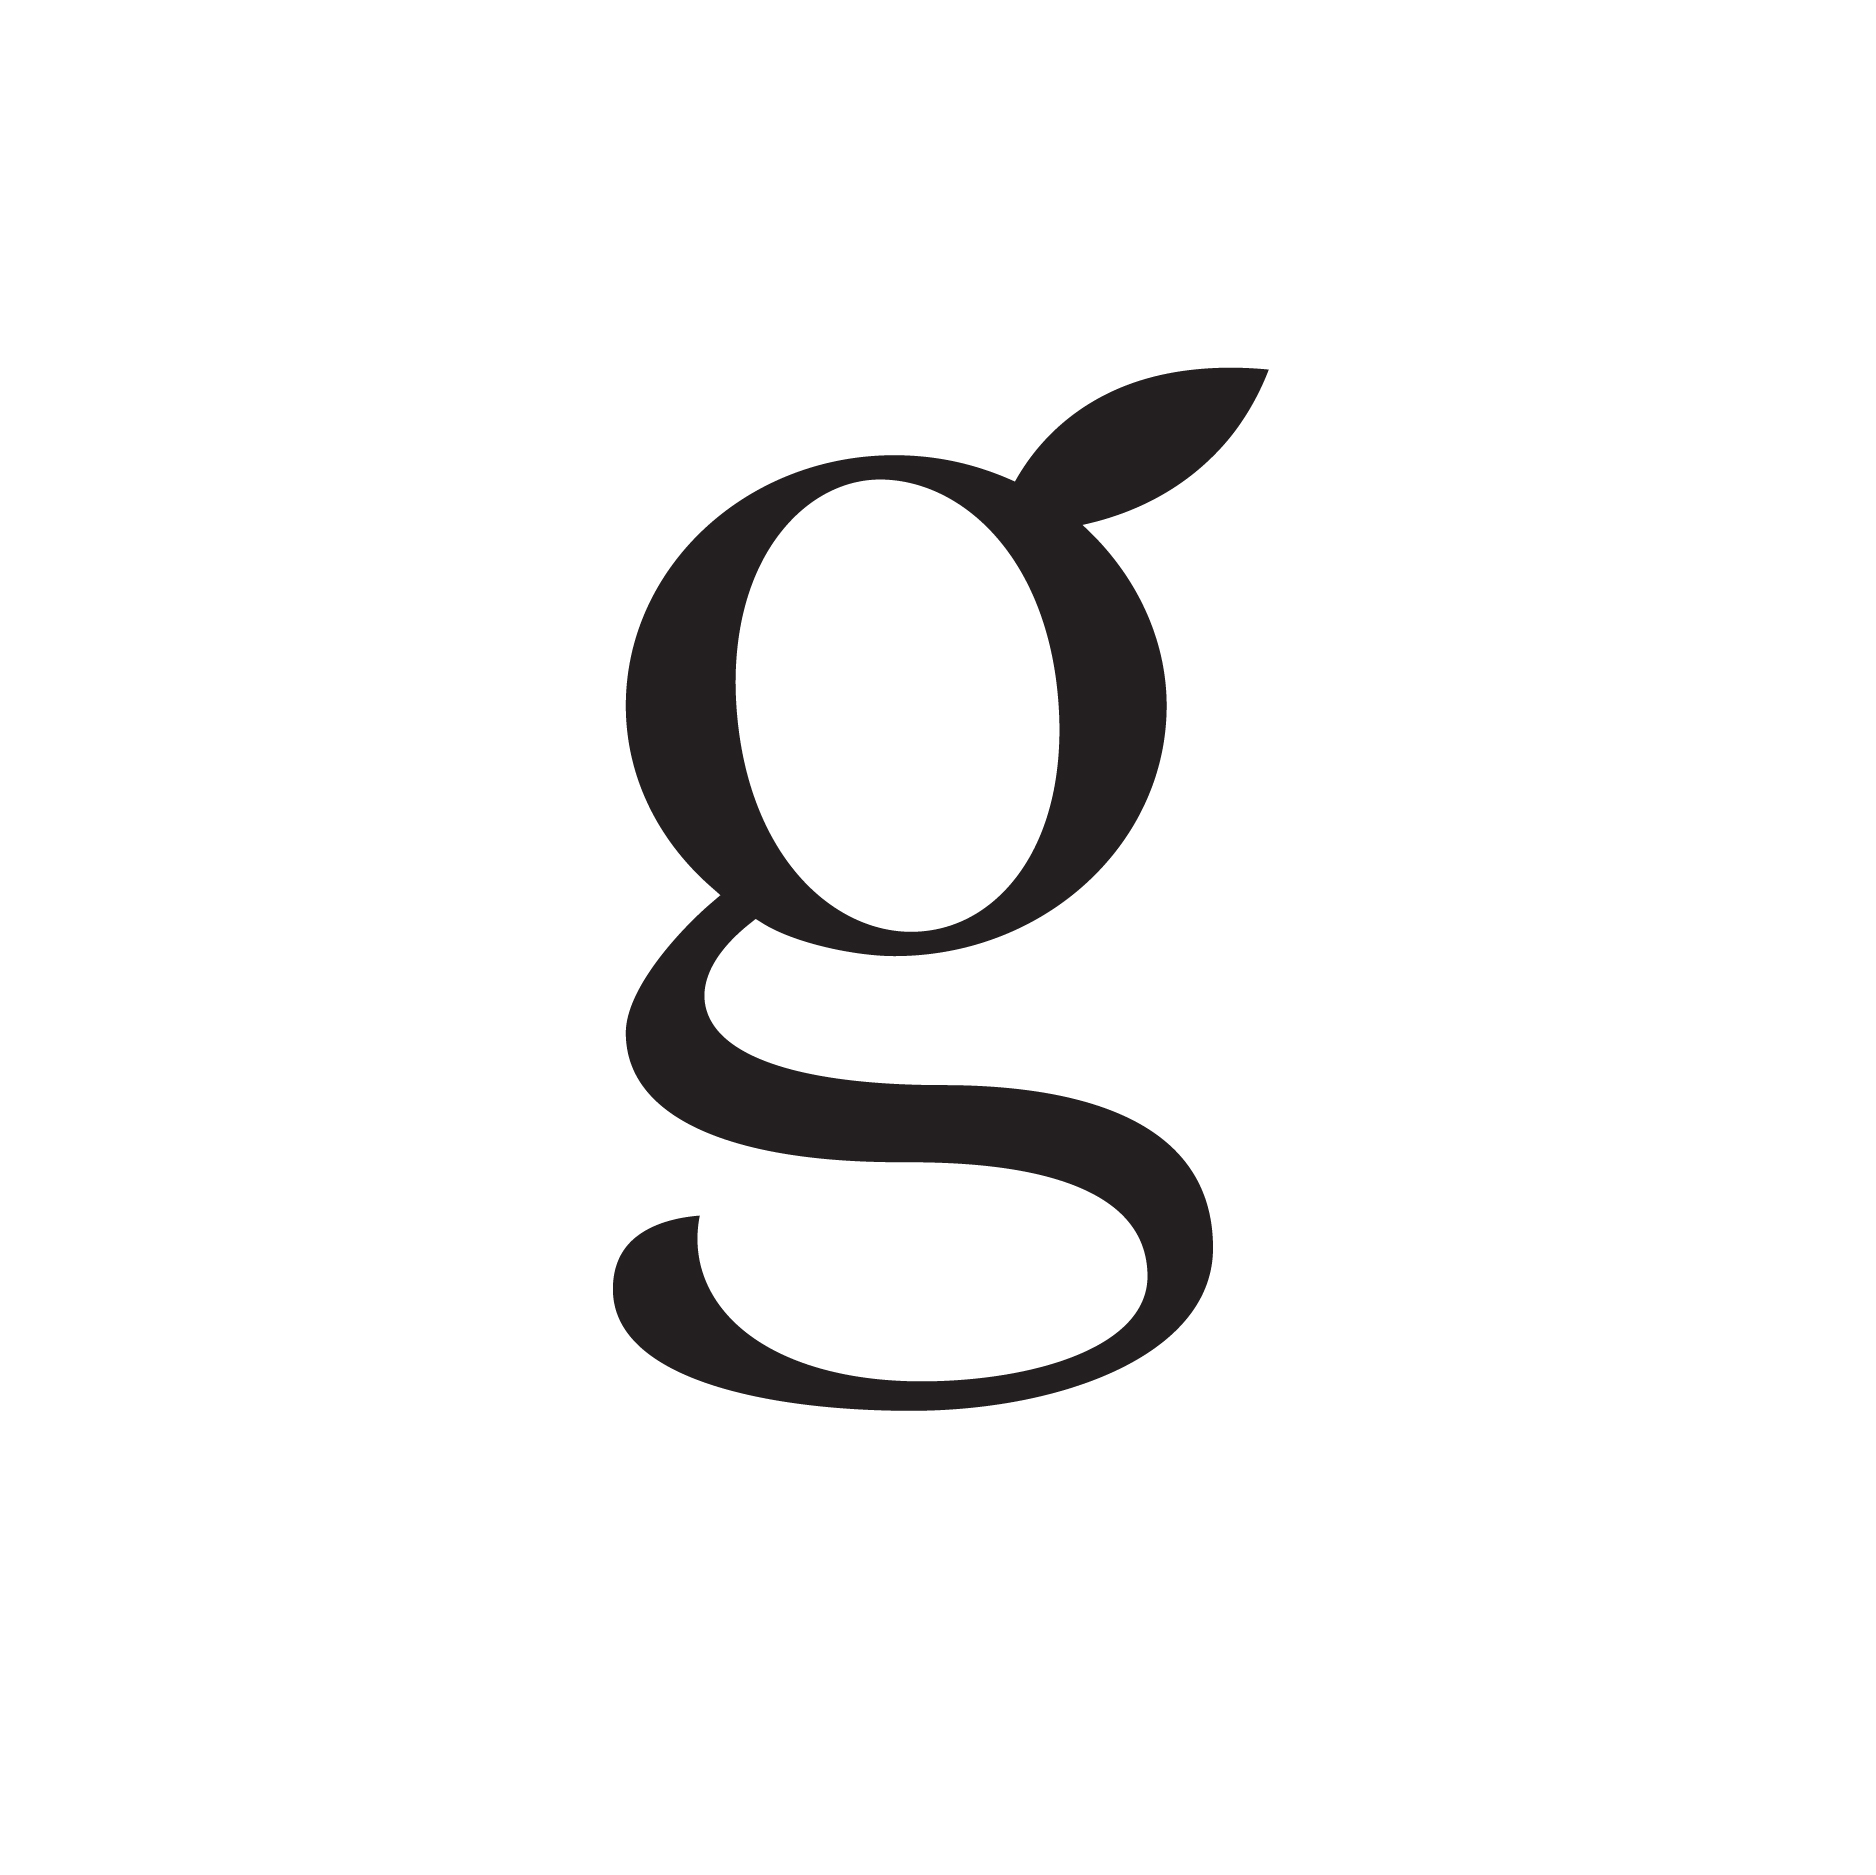 G for Grounded Seed logo design by logo designer Stellen Design for your inspiration and for the worlds largest logo competition